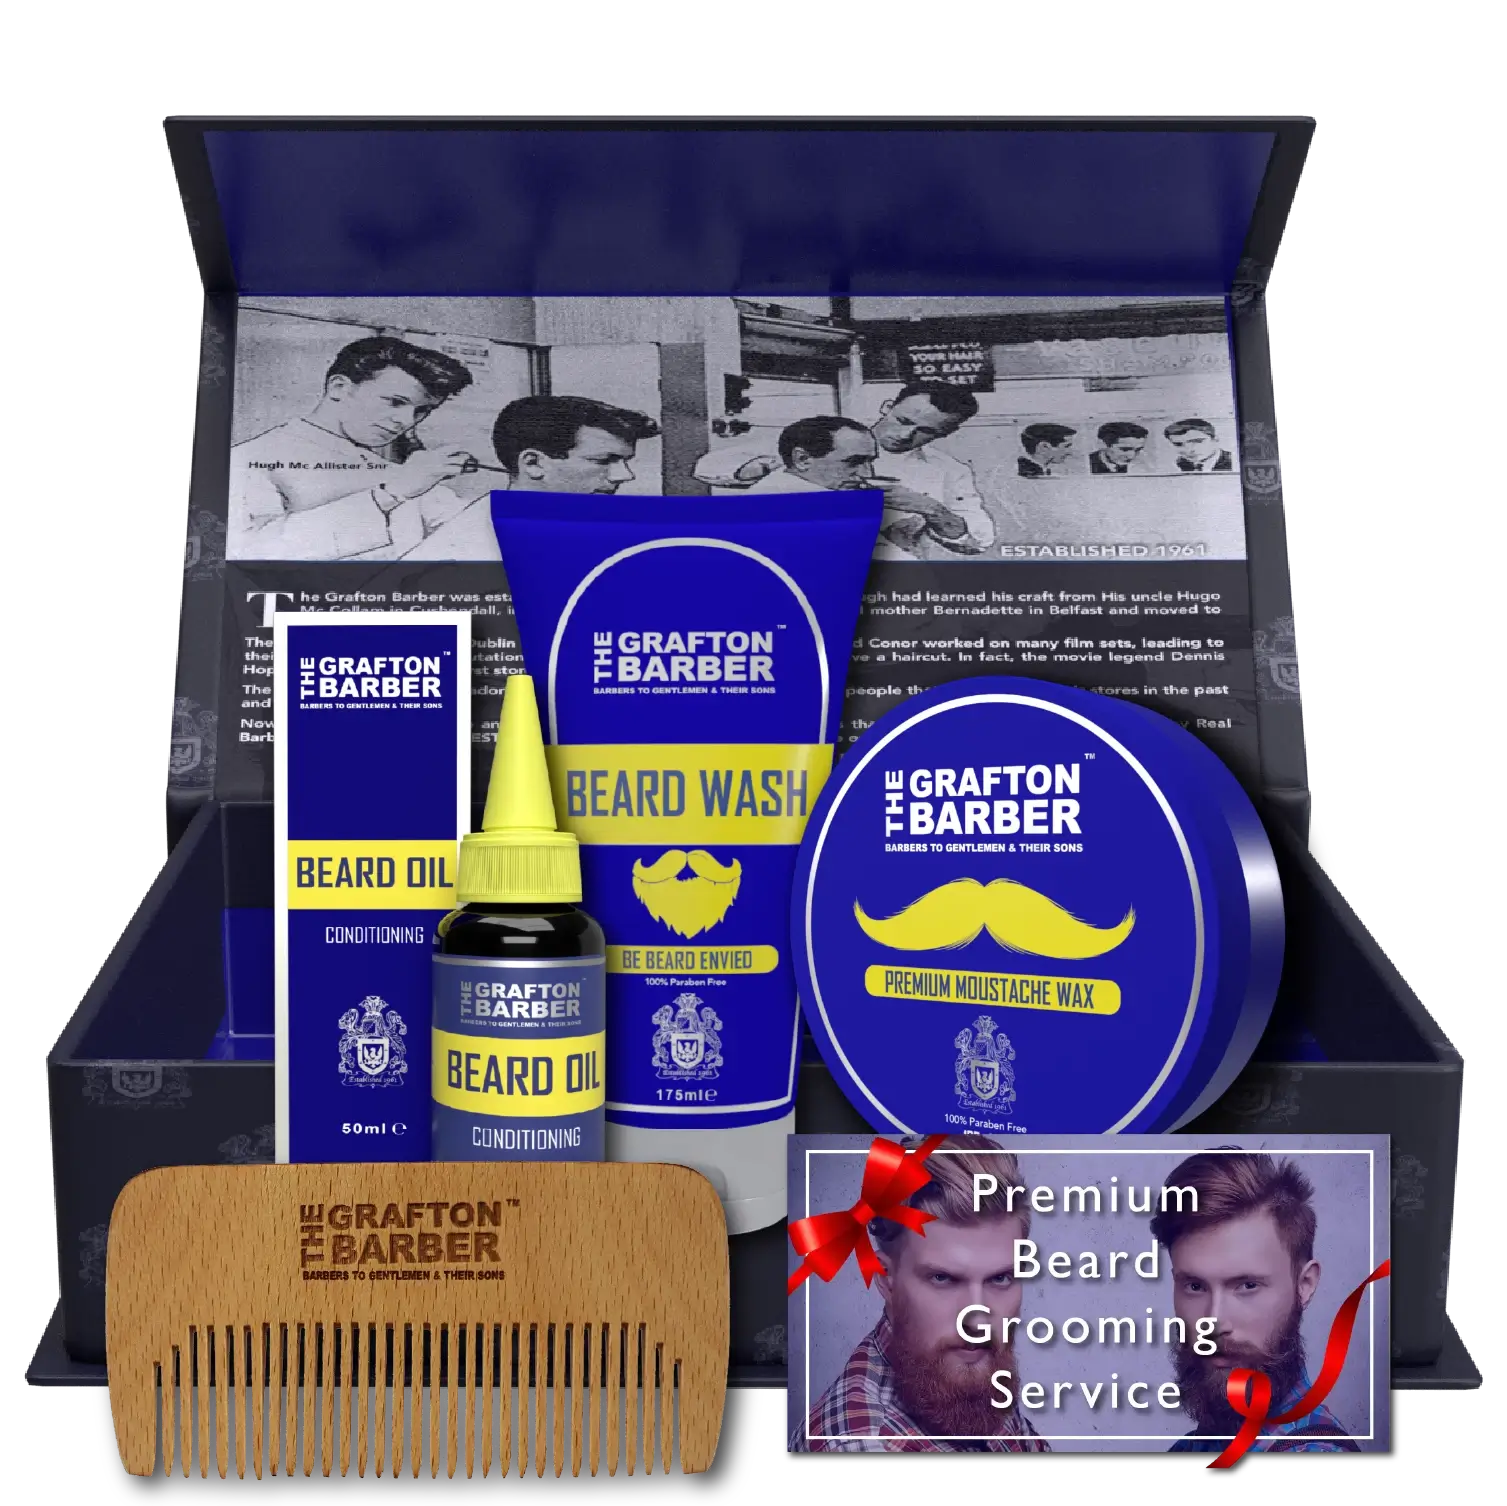 The Ultimate Beard Package by the Grafton Barber includes Conditioning Beard Oil, Premium Beard Wash, Moustache Wax, a Hand Made Wooden Beard Comb and a voucher for premium Beard Trim in one of our barbershops - all packaged inside our limited edition signature black magnetic closure gift box.